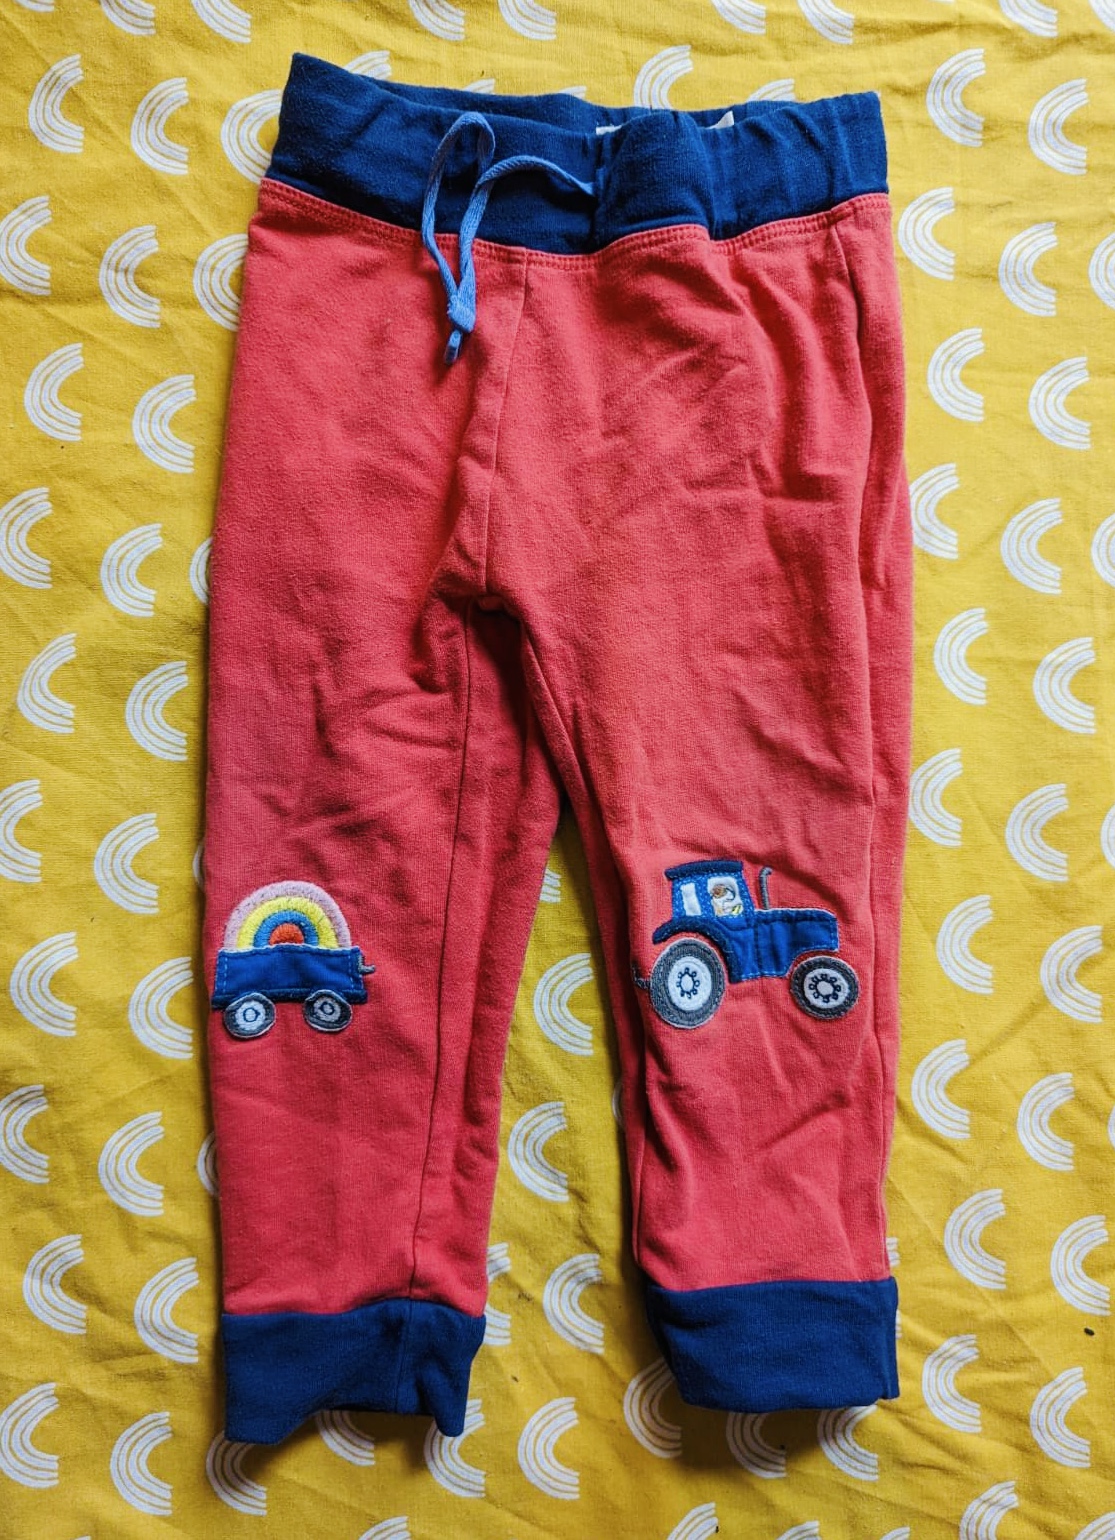 Red tractor trousers - Swapc's Kids Clothes Swap